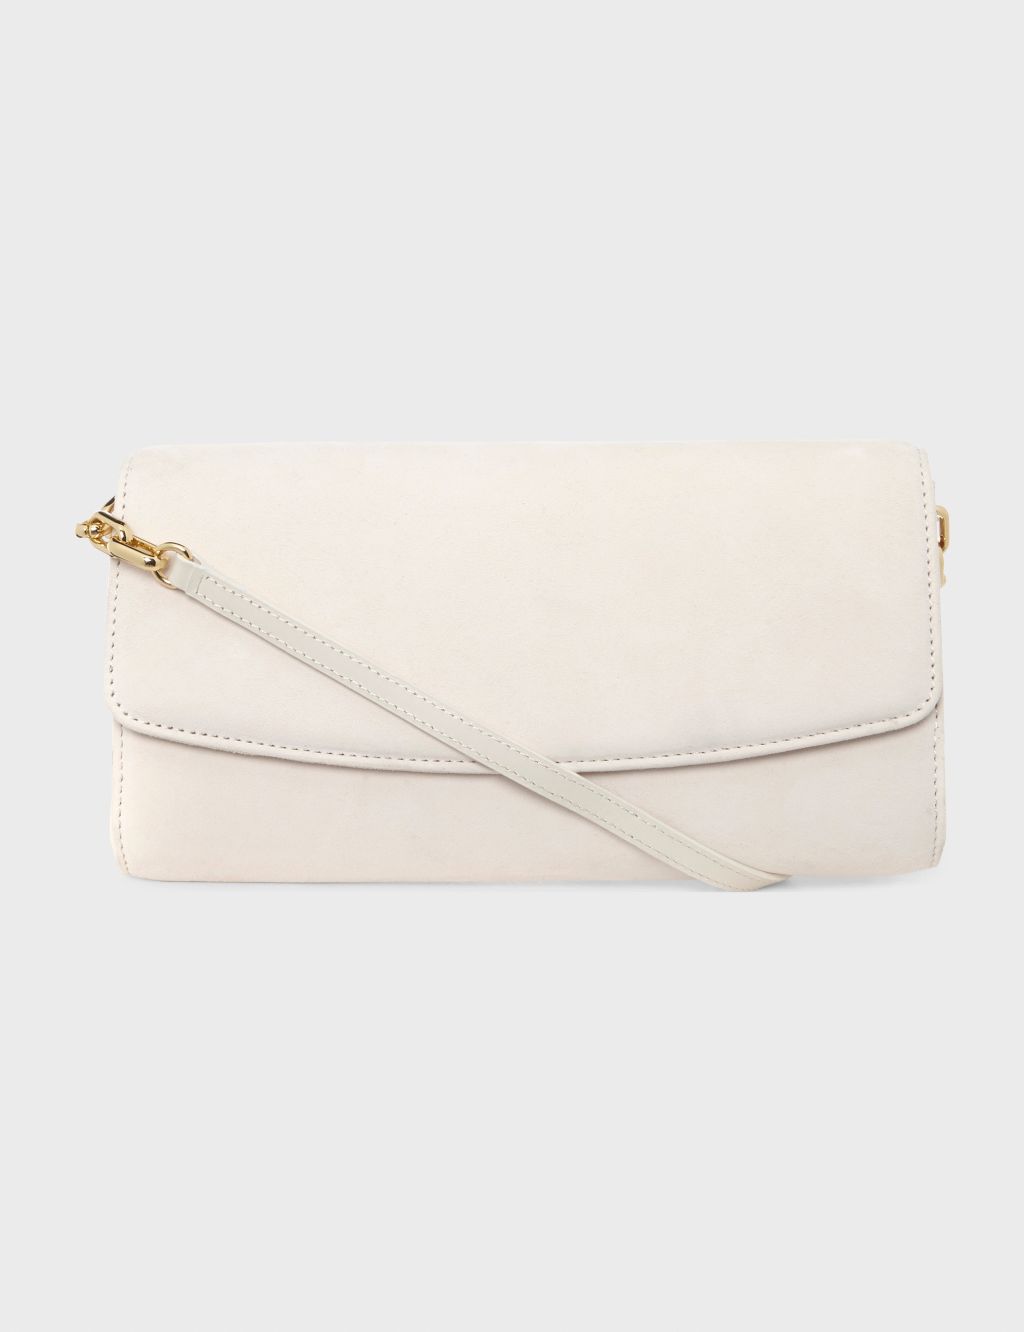 Leather Clutch Bag image 1